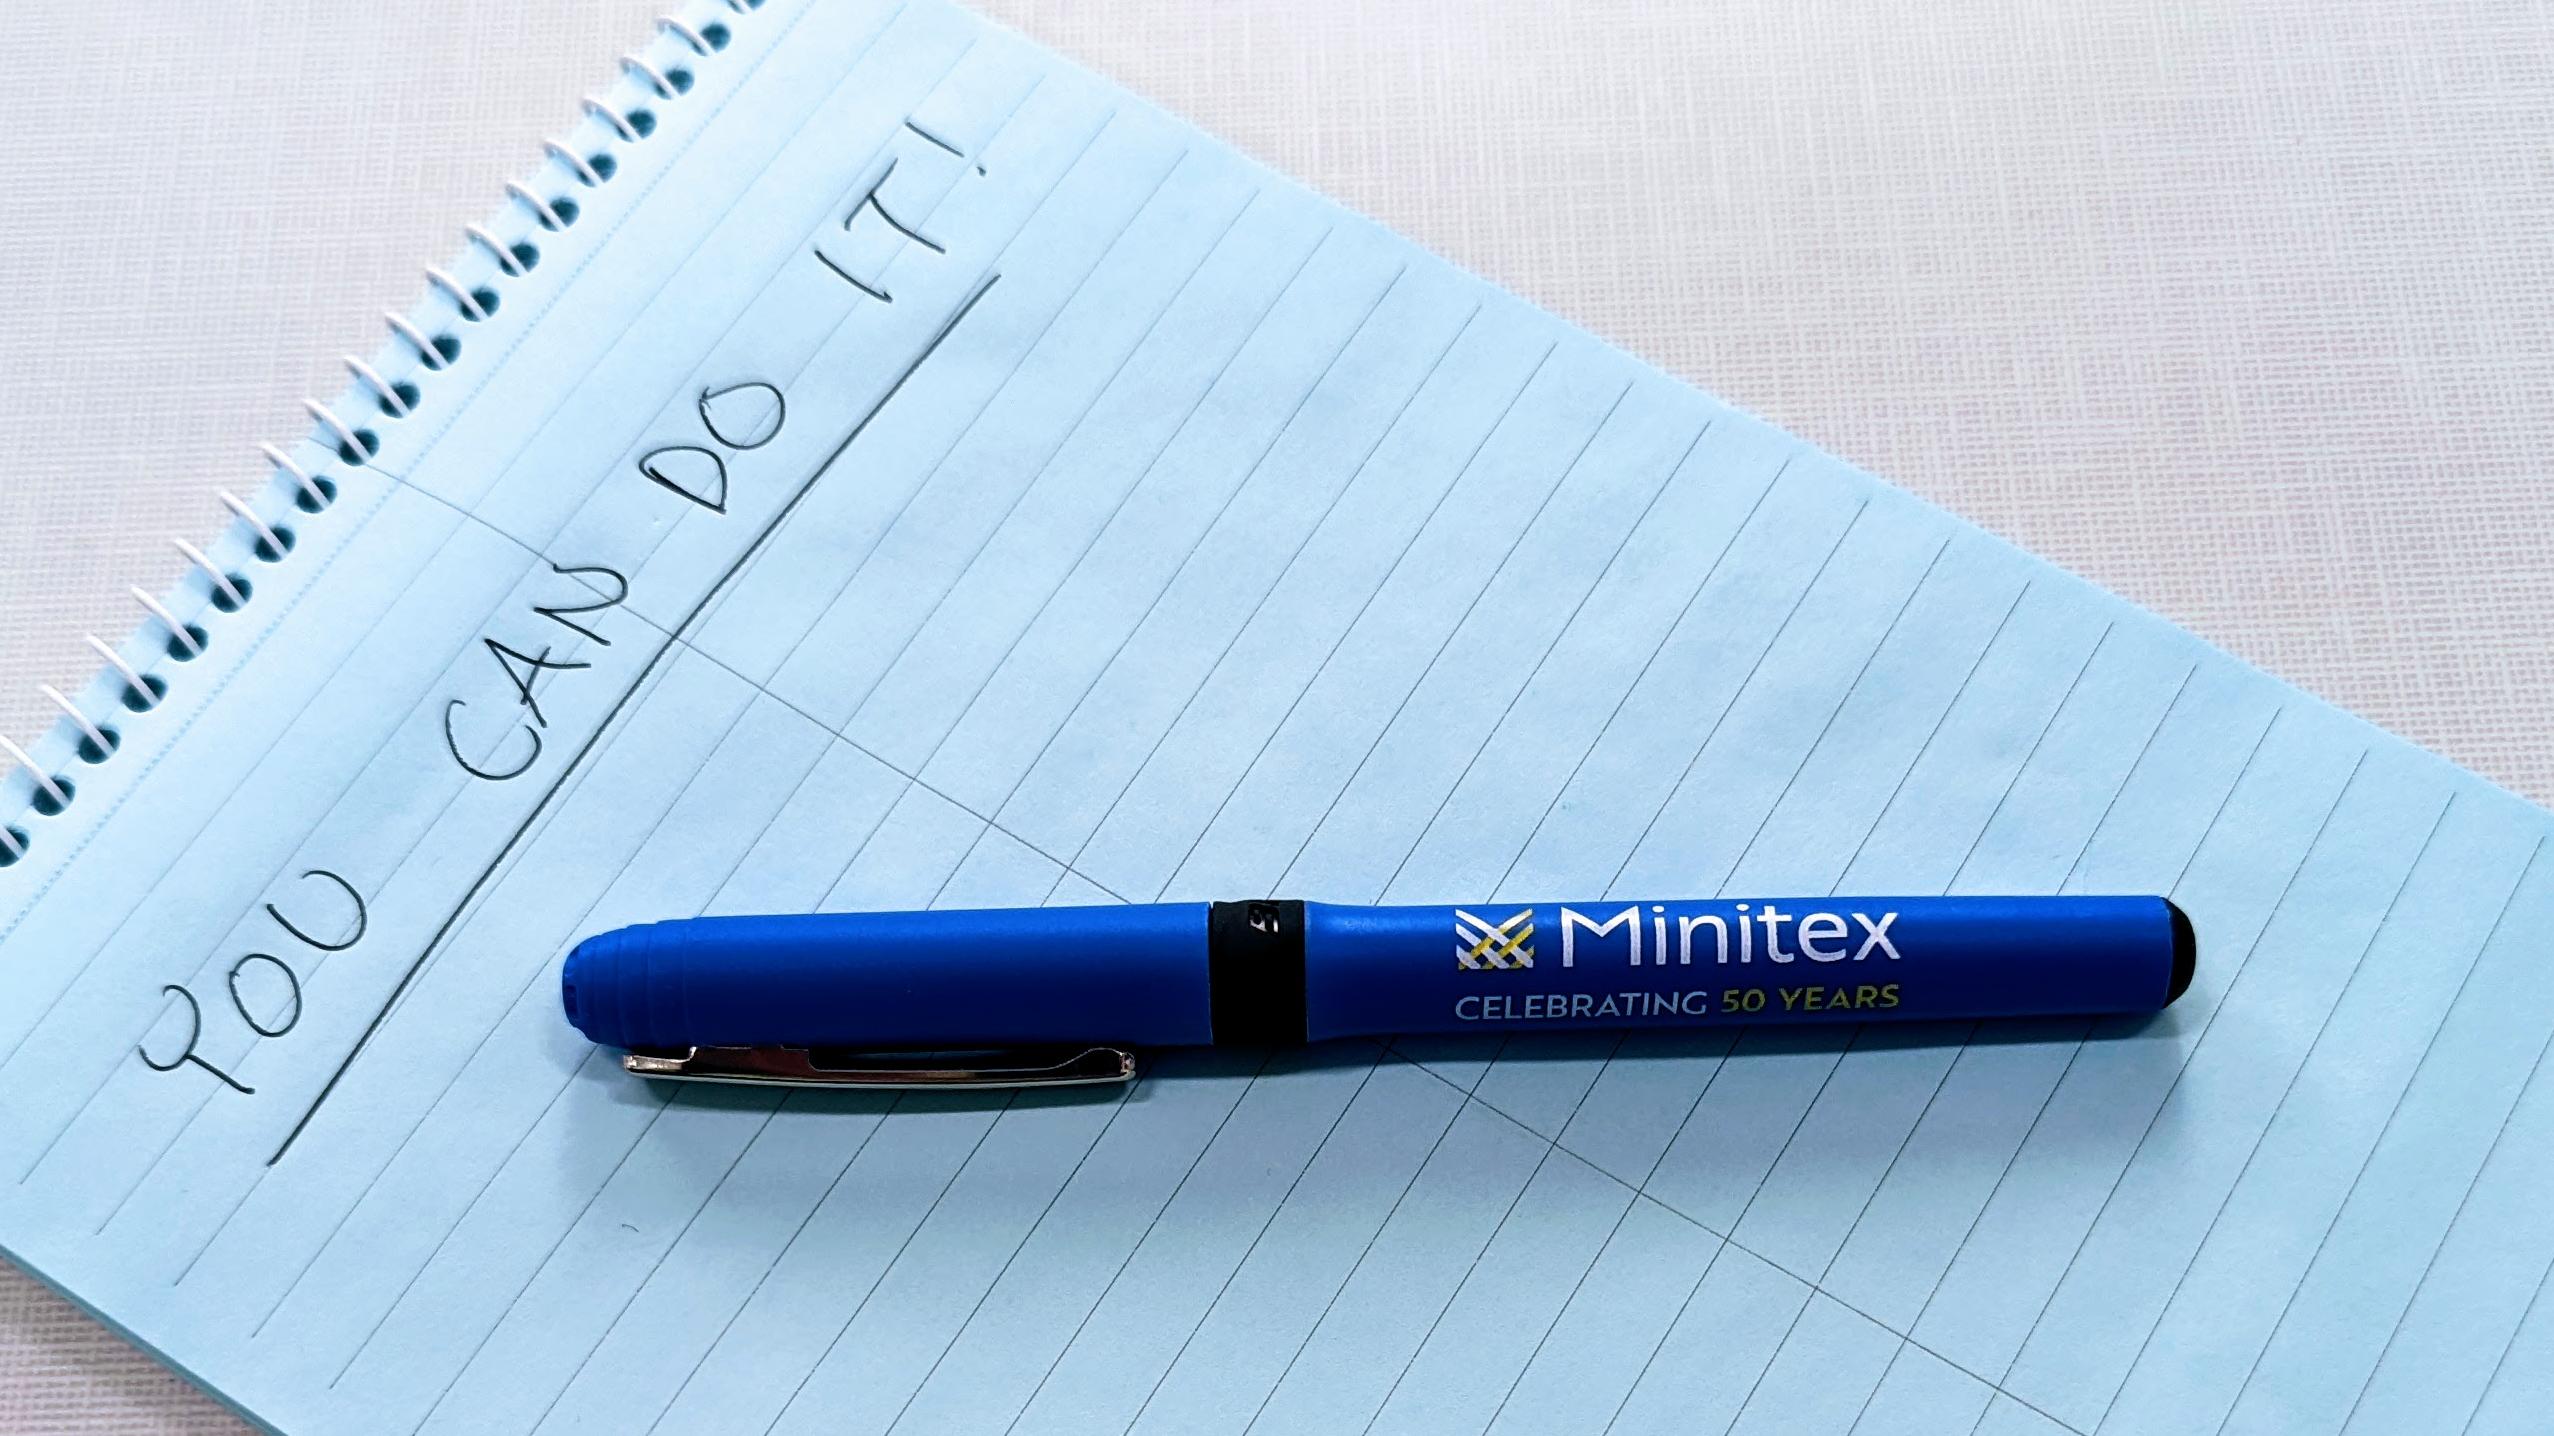 An image of a blue Minitex pen sitting on a notepad with "You can do it!" written at the top.